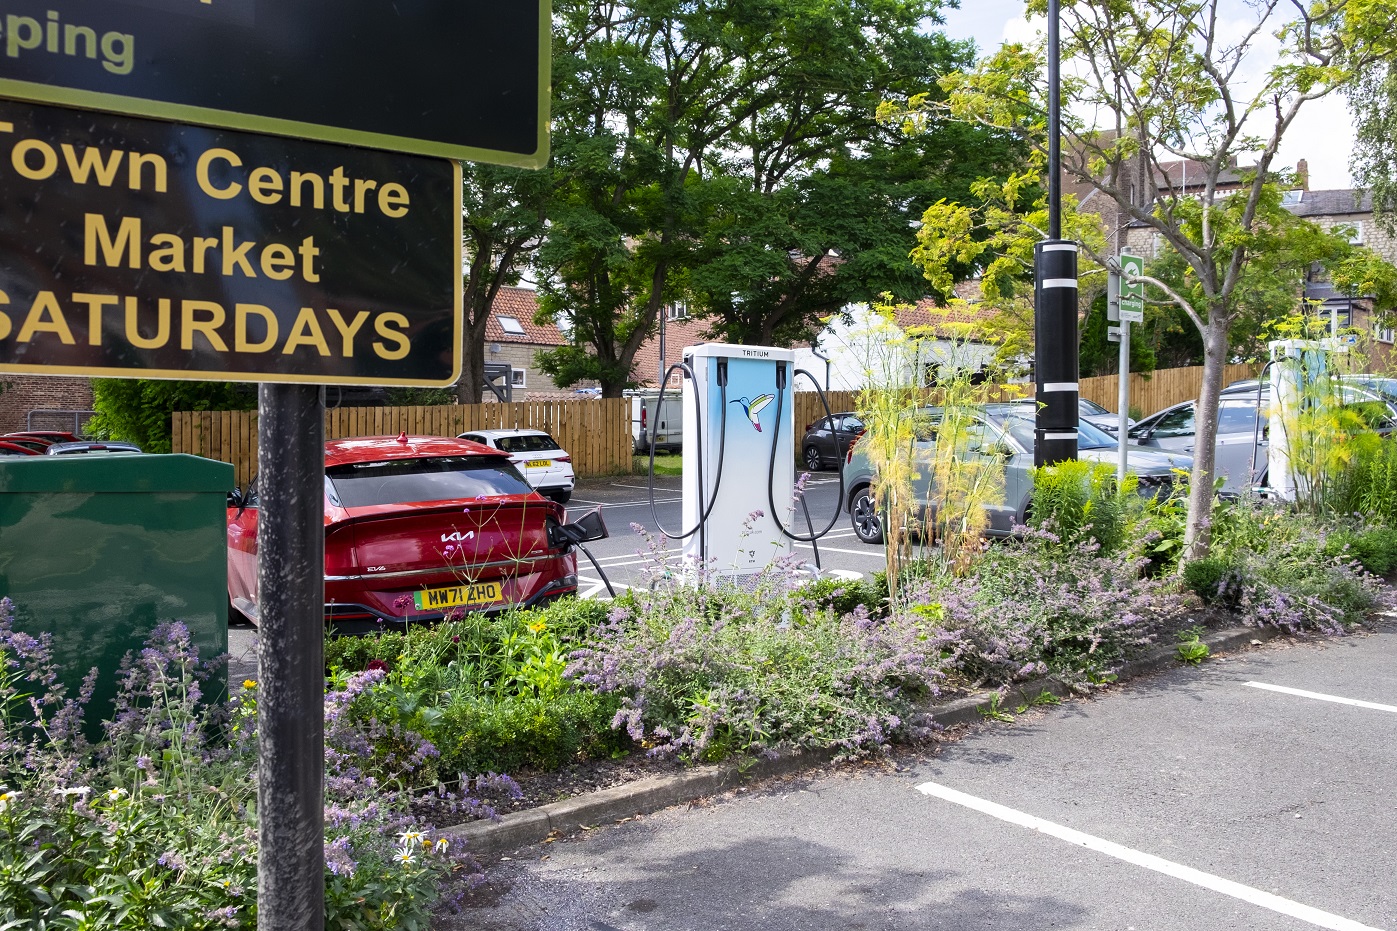 Zest charge points installed in Malton car park